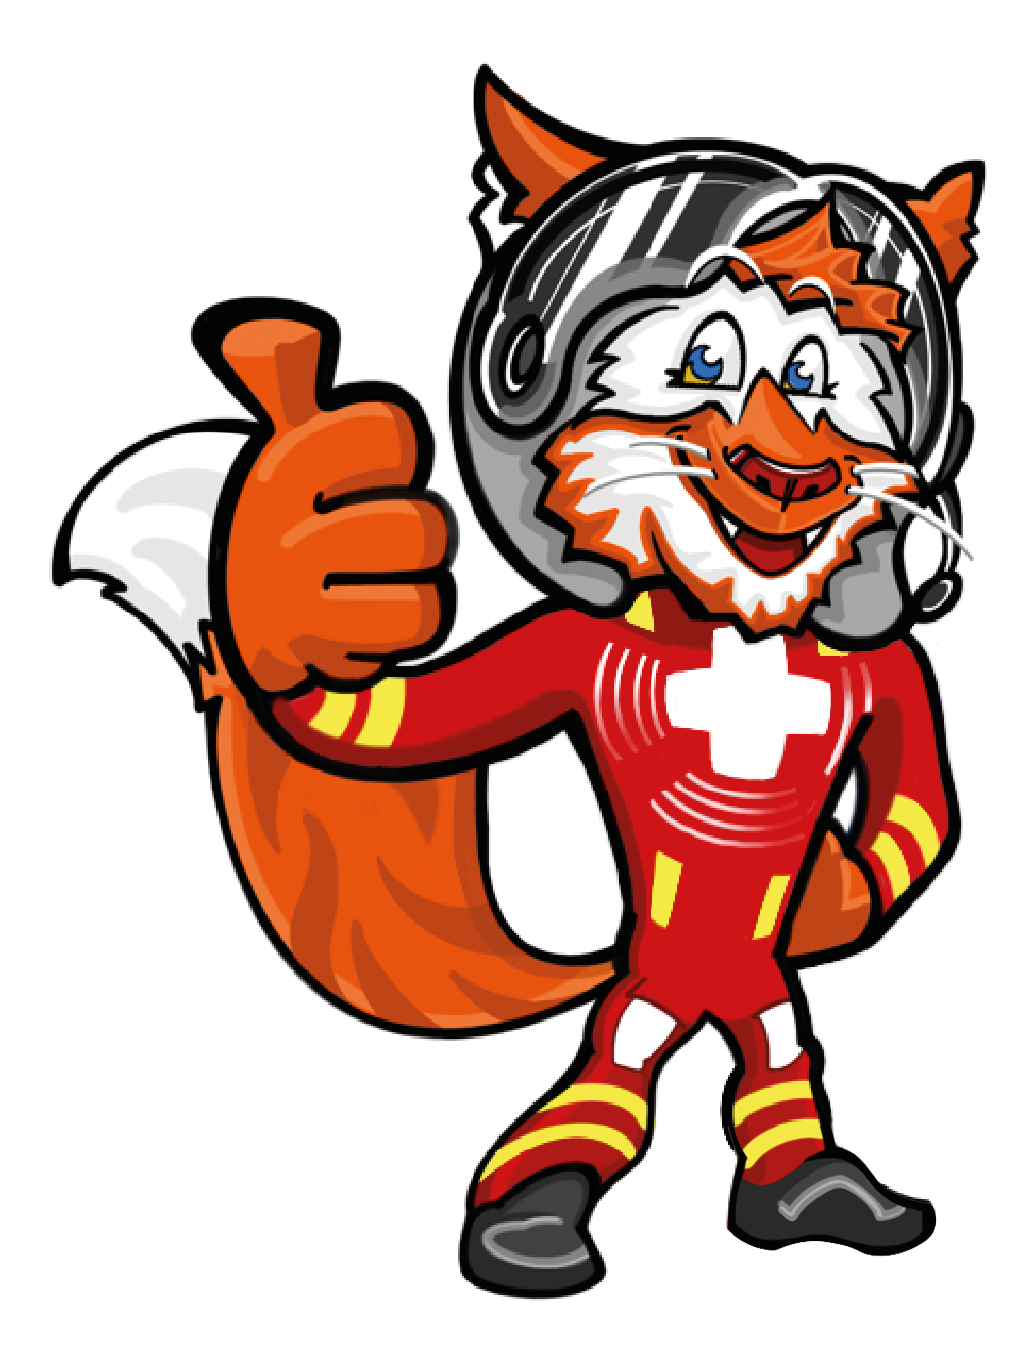 An image of a fox wearing a helmet and a red outfit which has a white cross on the chest area. The have a bushy tail and they are holding the thumb up. They have black shoes on.